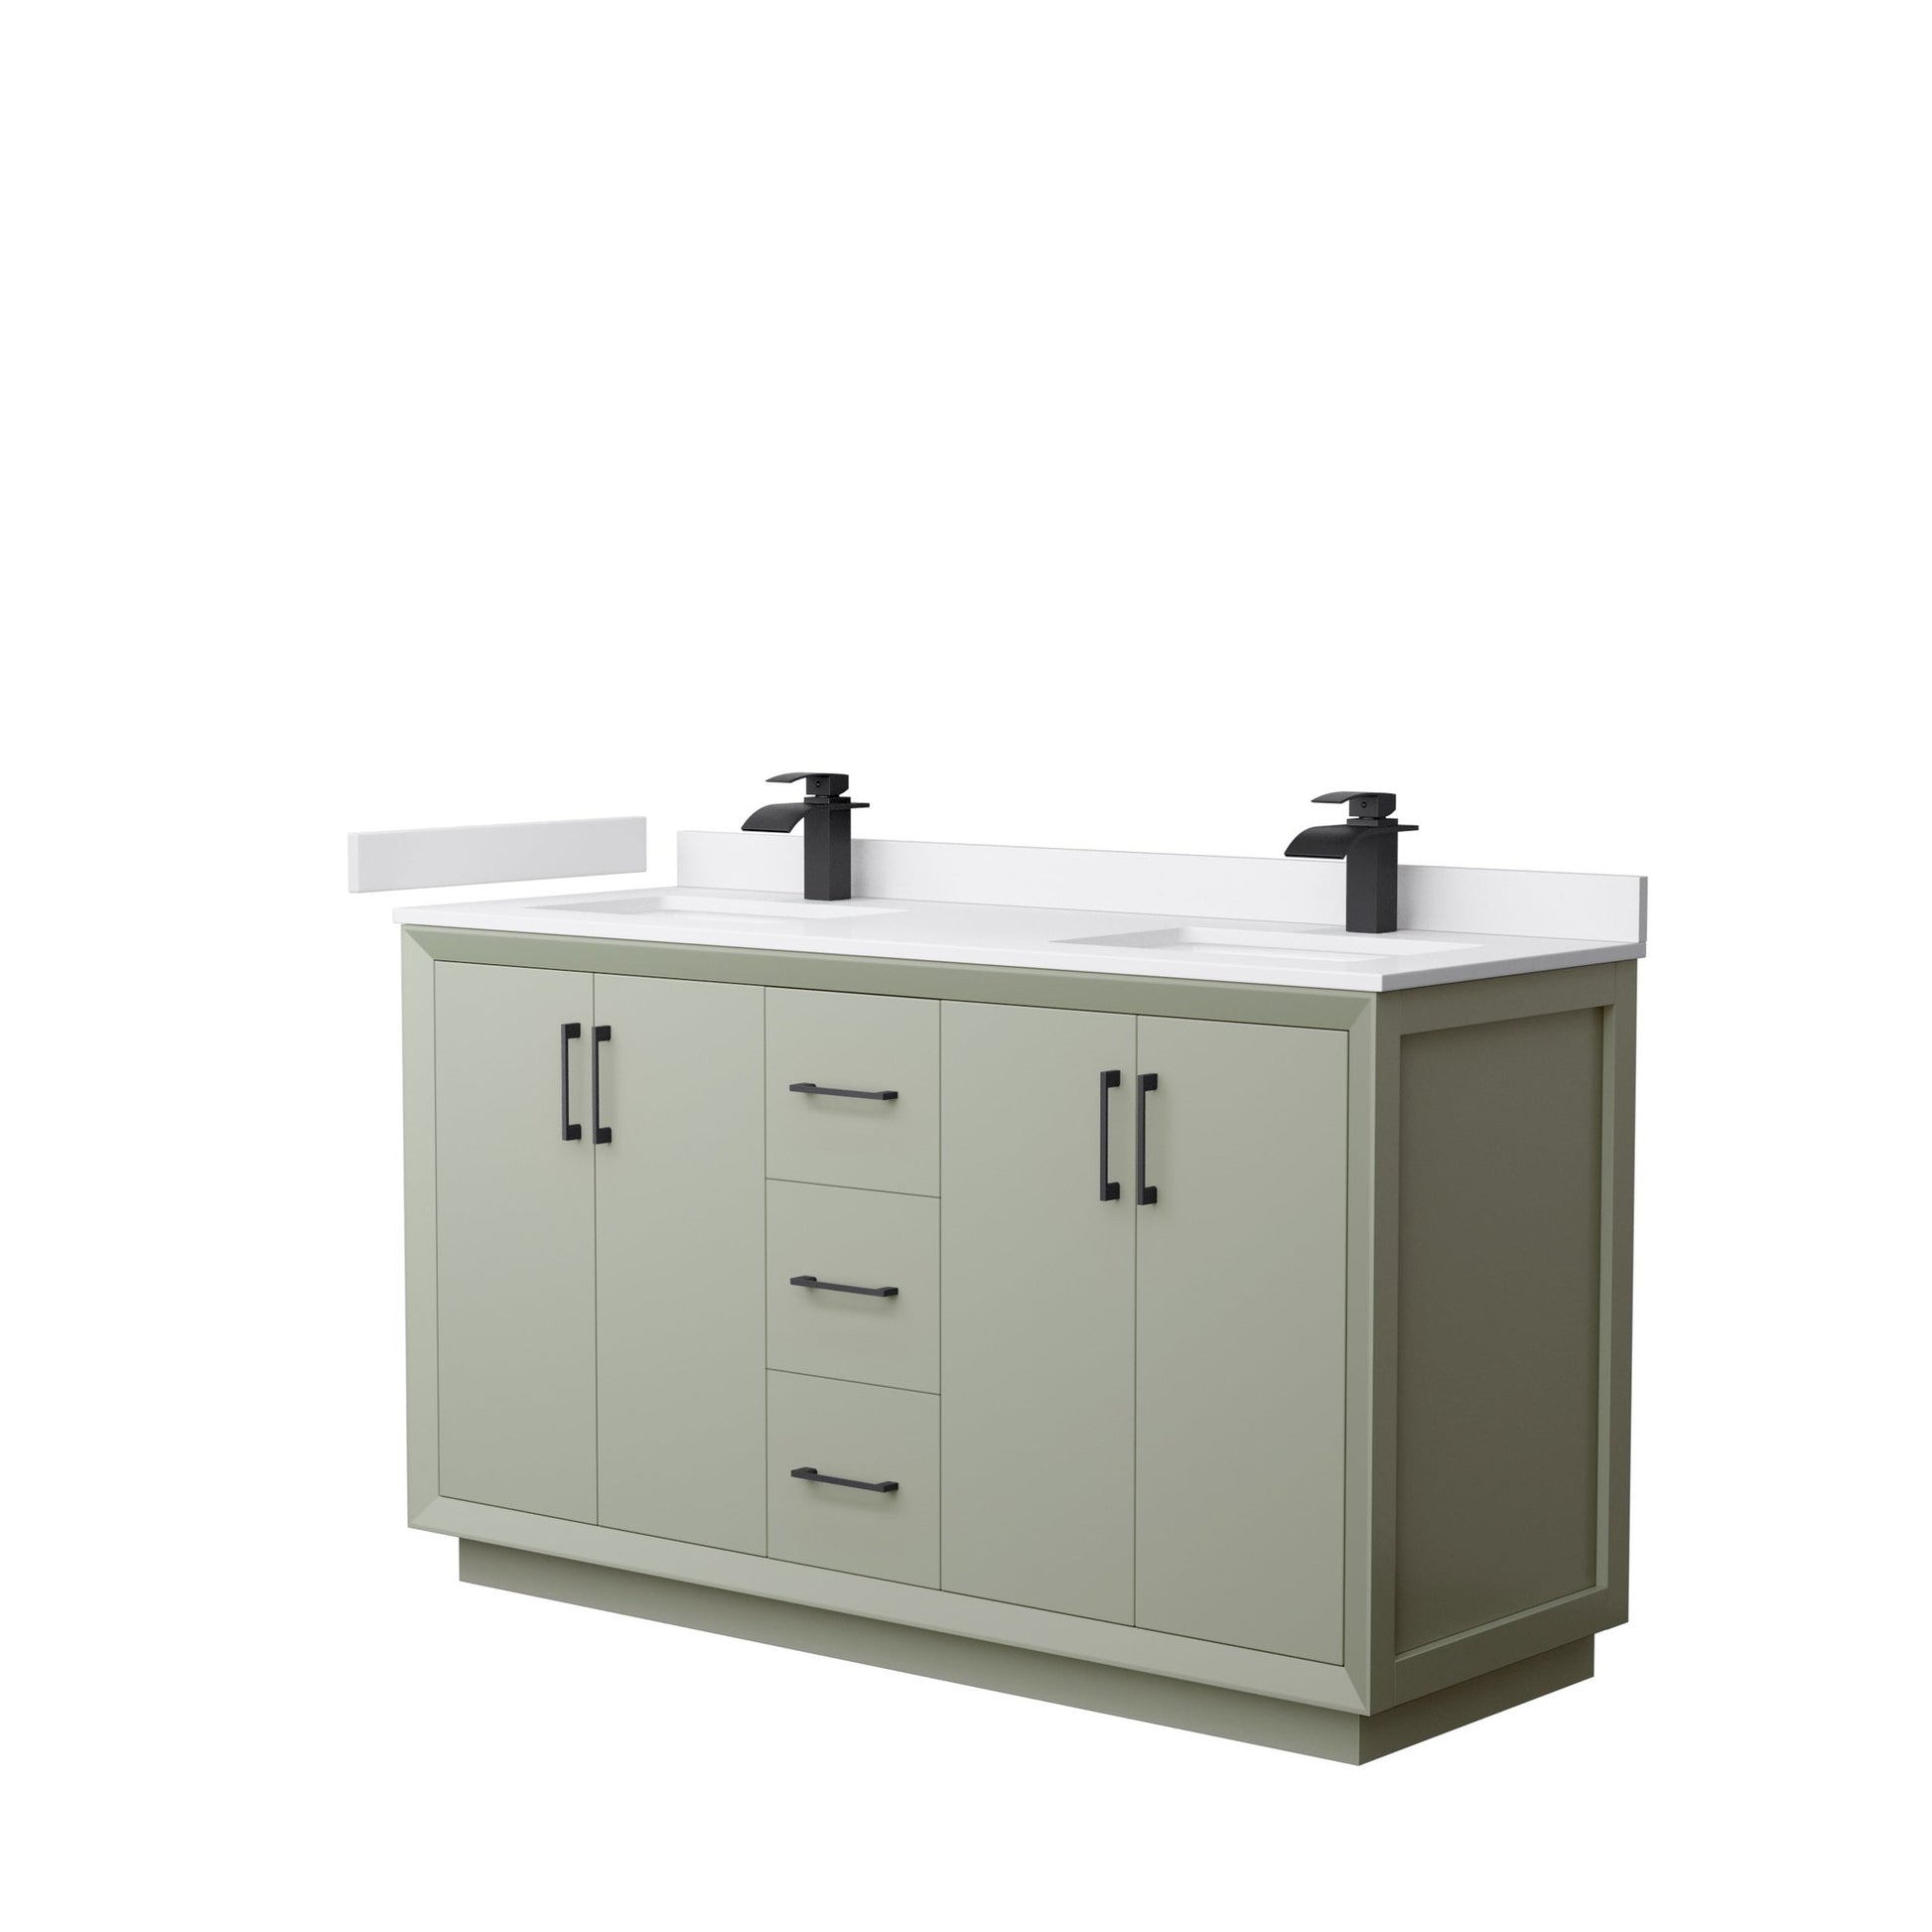 Wyndham Collection Strada 60" Double Bathroom Vanity in Light Green, White Cultured Marble Countertop, Undermount Square Sinks, Matte Black Trim